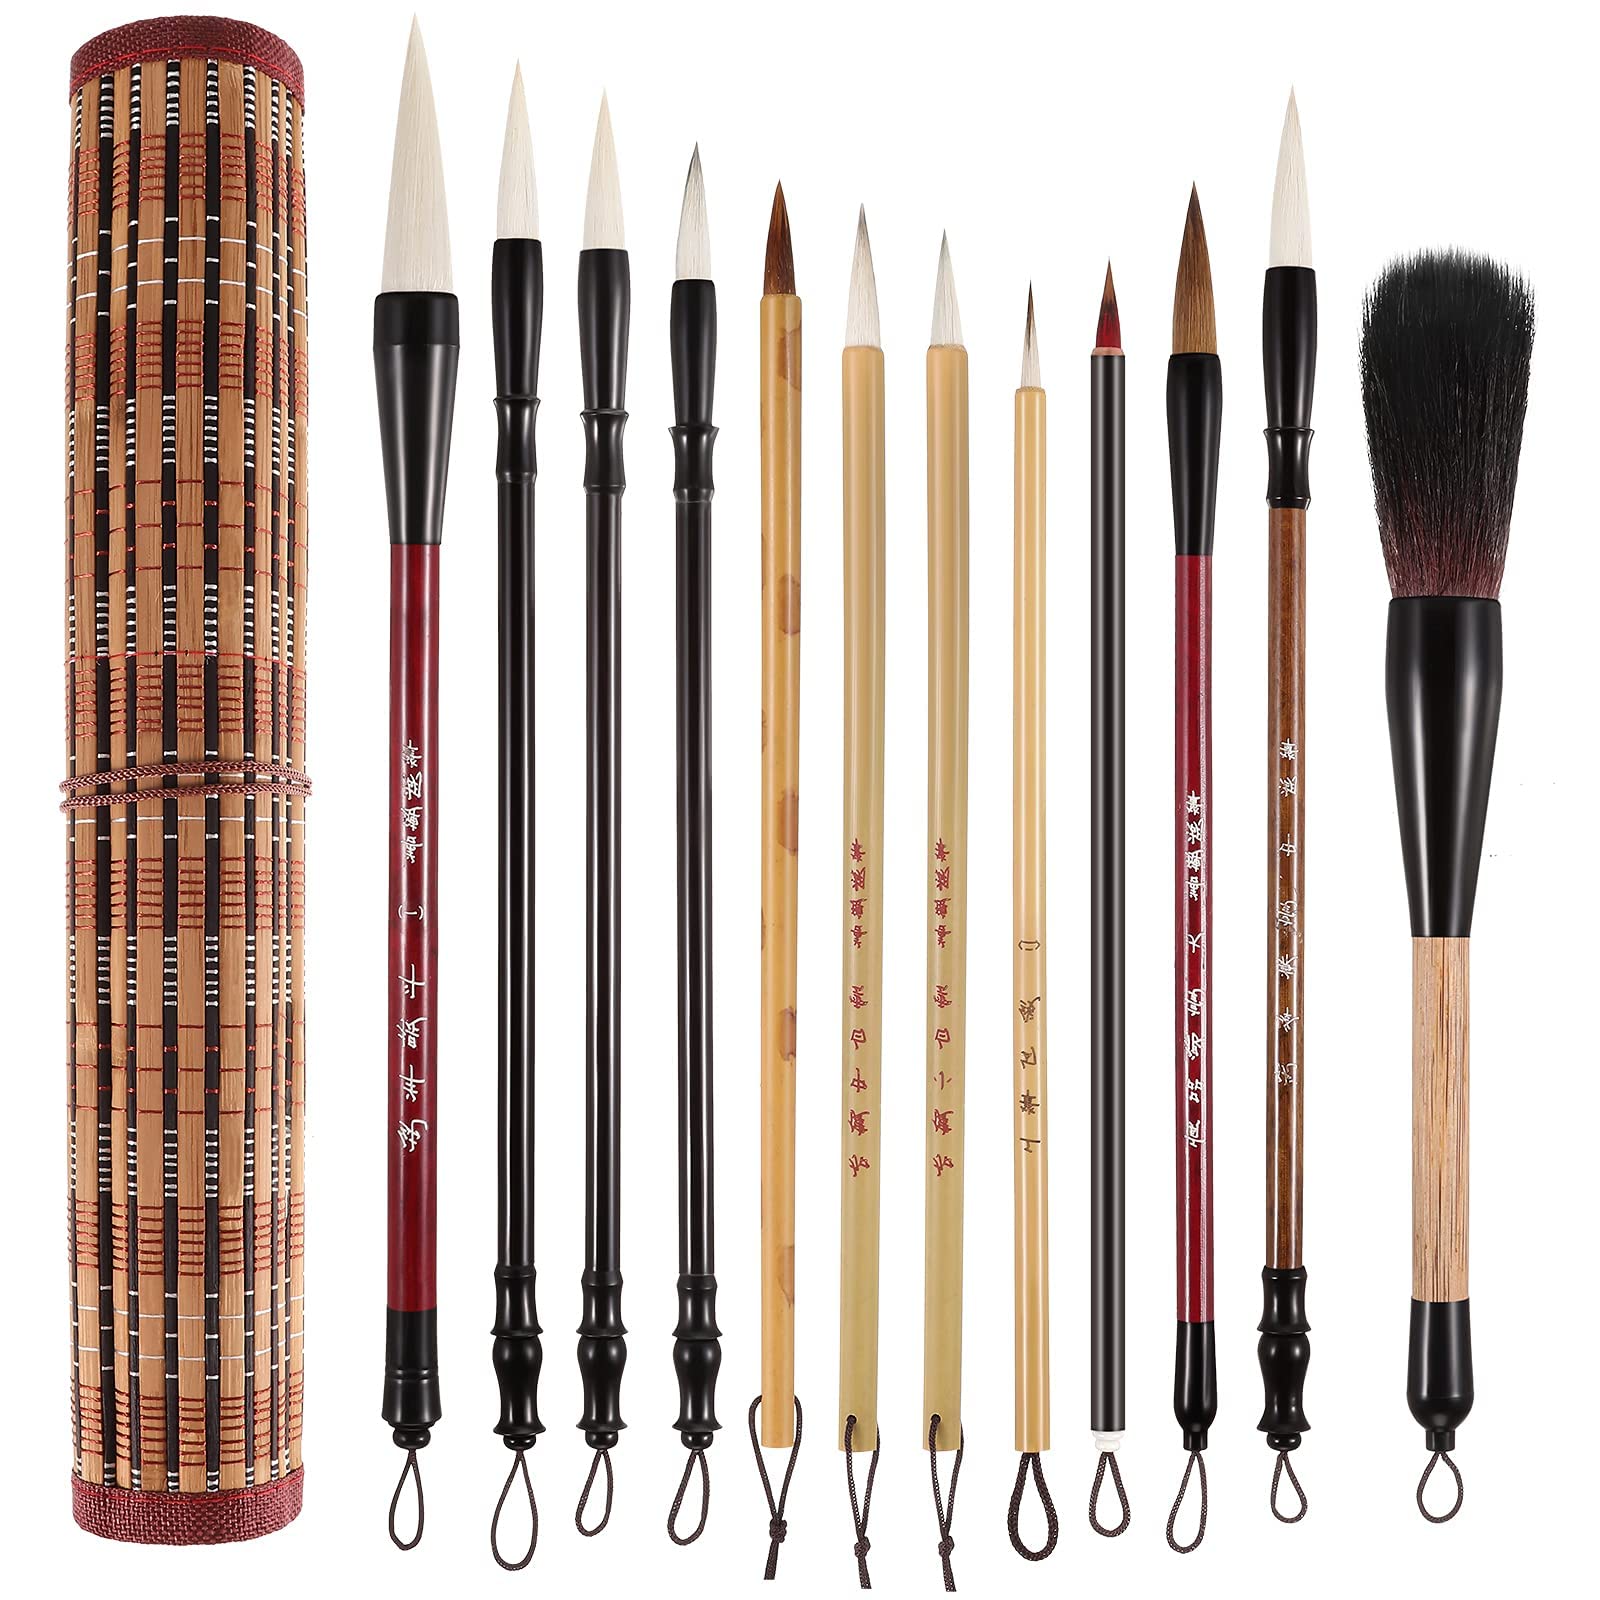 12 Pieces Chinese Calligraphy Brushes Painting Writing Brushes Watercolor  Brushes Set Kanji Japanese Sumi Painting Drawing Brushes Kanji Art Brushes  with Roll-up Brush Holder